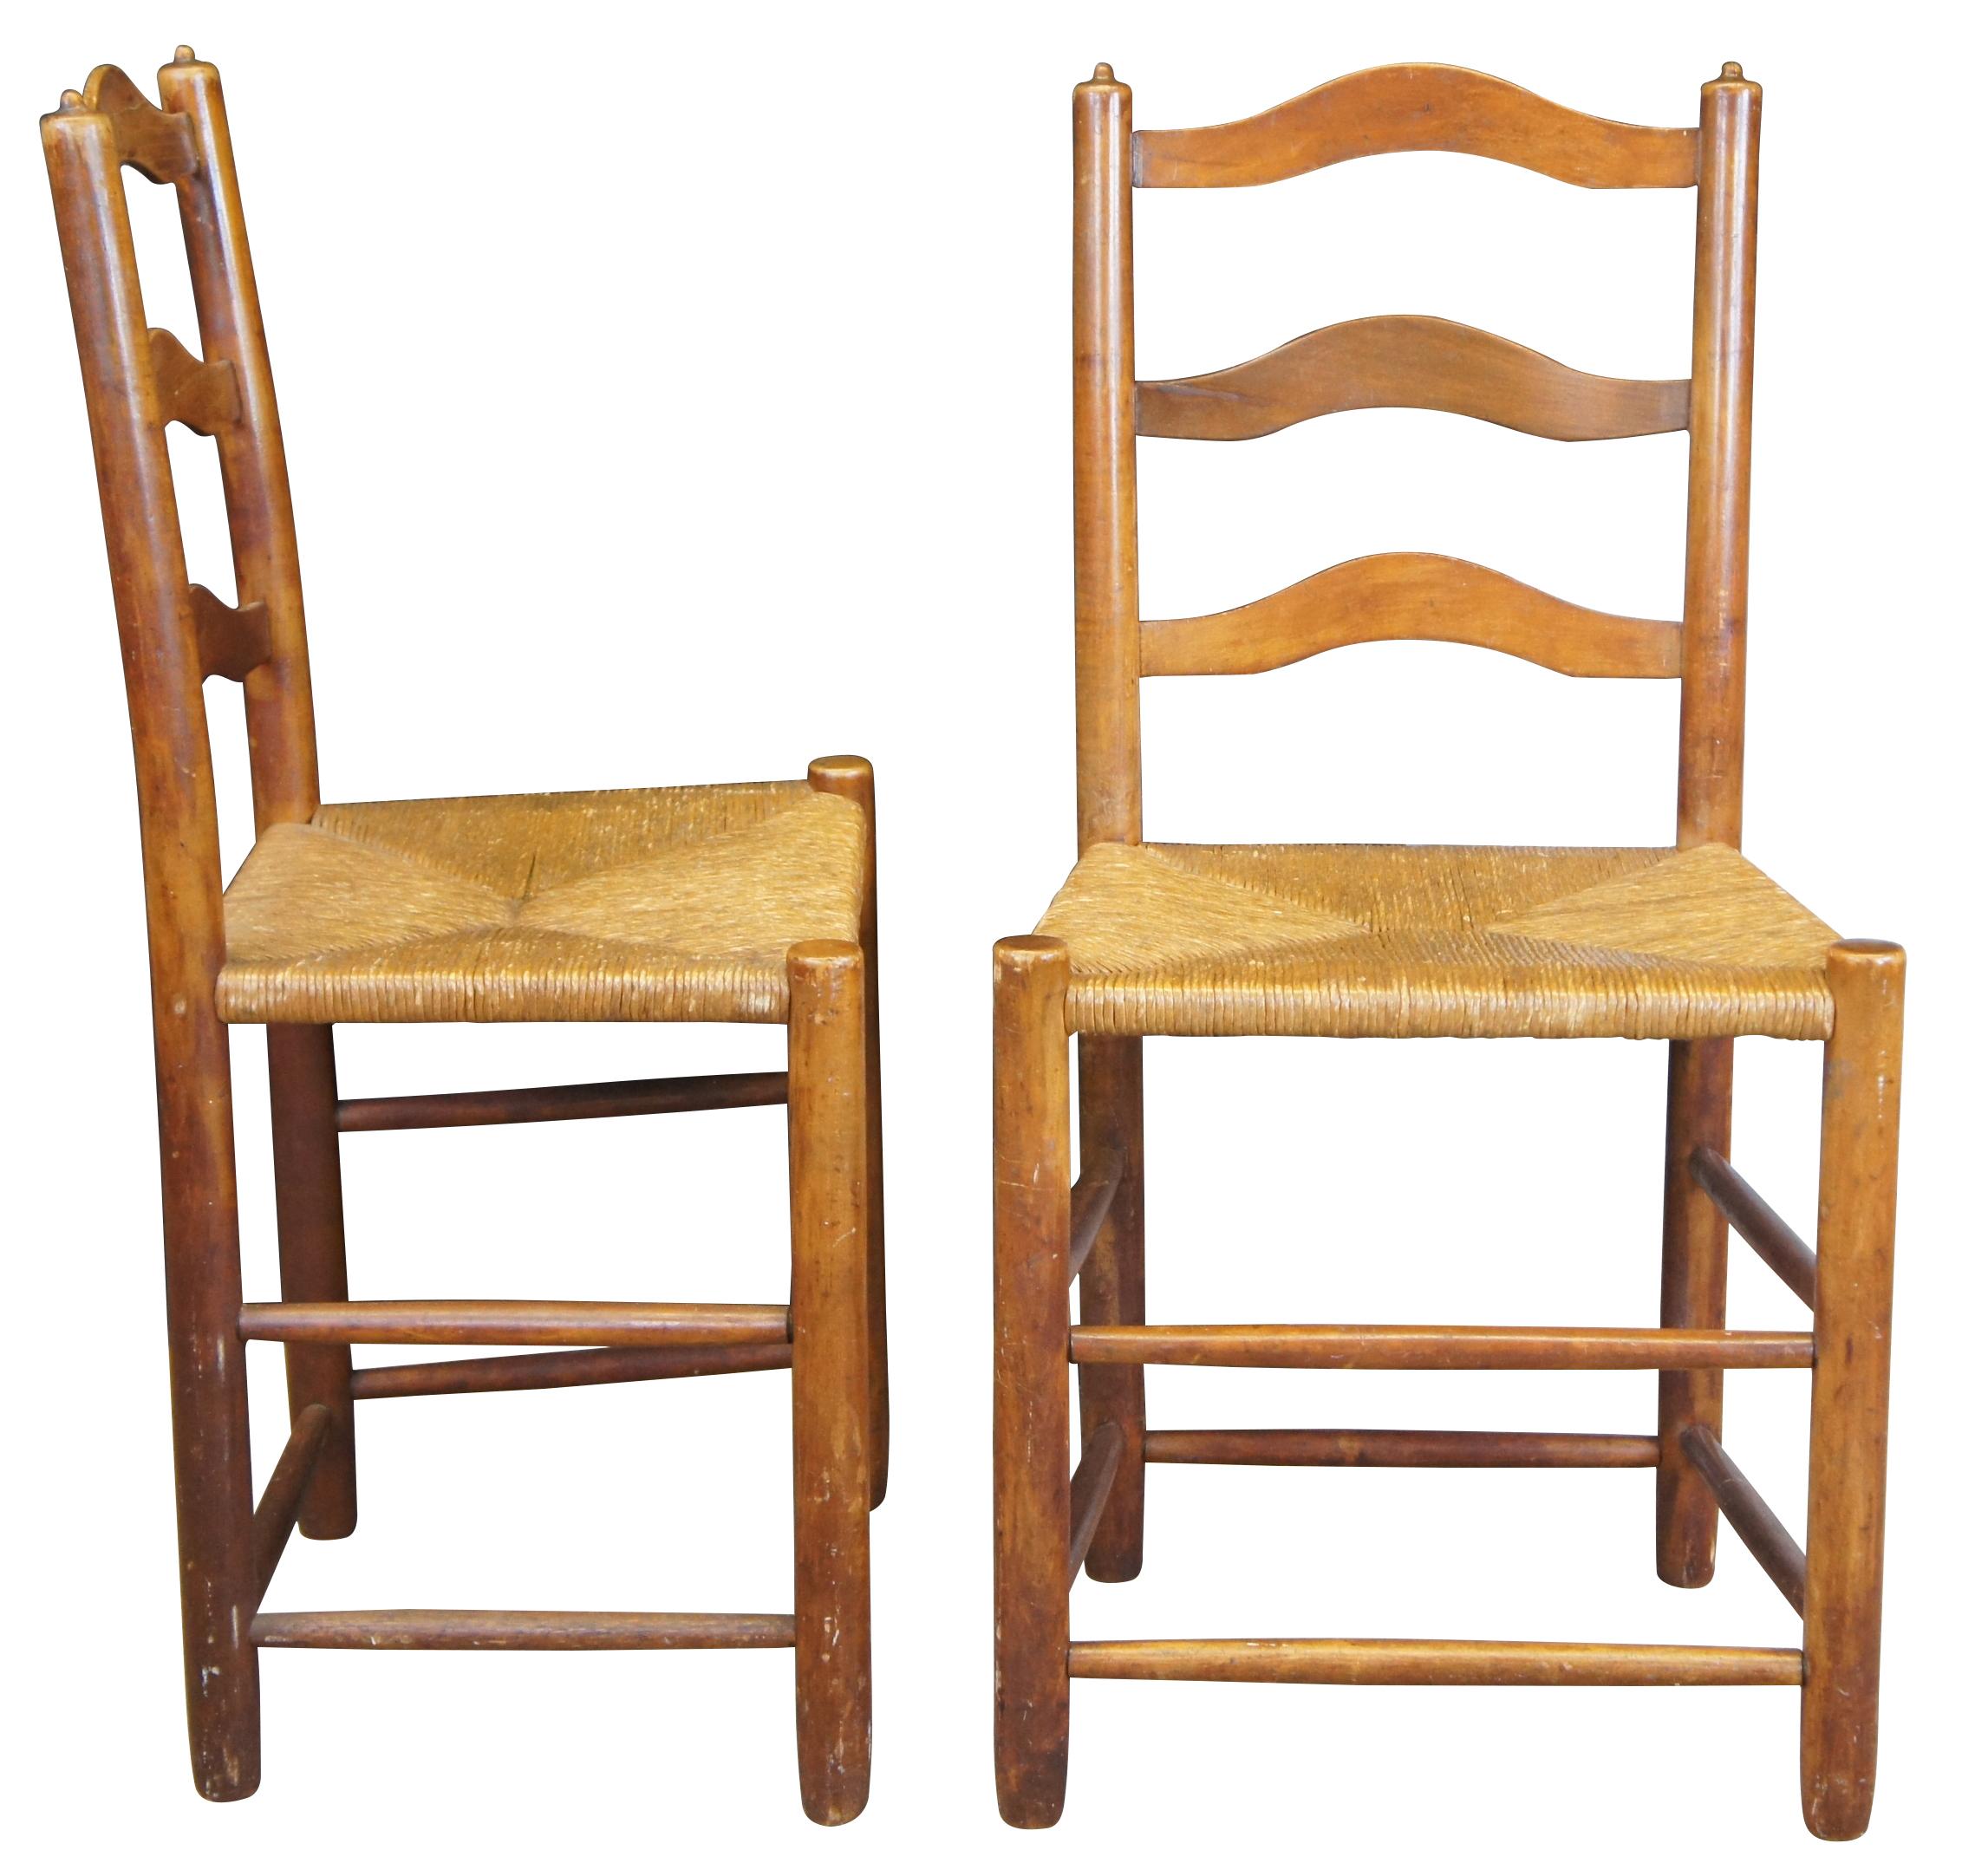 Vintage Maple Dining Chairs - 7 For Sale on 1stDibs